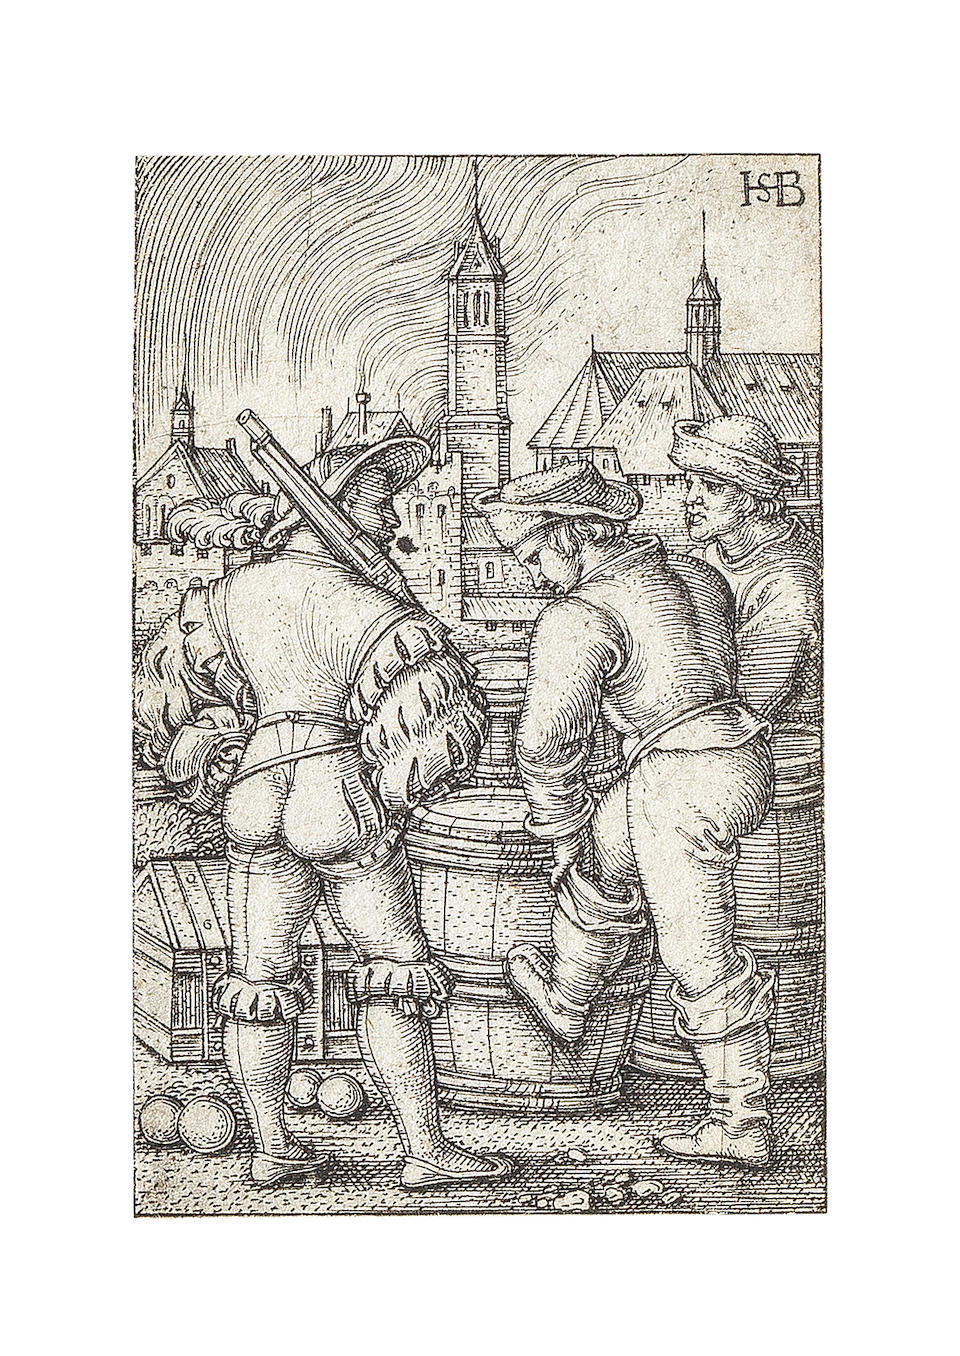 Hans Sebald  Beham  (1500-1550) A Collection of thirteen engravings Including St Luke, 1541, Three Soldiers and a dog, Guard near the Powder Casks, circa 1531-50, It is cold weather, 1542, The Standard Bearer, 1526, three plates from Cognition and the Seven Virtues, 1539, Charity, St Jerome with an angel, 1521, Saints Simon and Jude, 1520, St Sebald, 1521, Moses and Aaron, 1526, on laid paper, good to later impressions, most trimmed to the platemark, various conditions Sheet 120 x 100mm. (4 3/4 x 4in.)(and smaller) 13